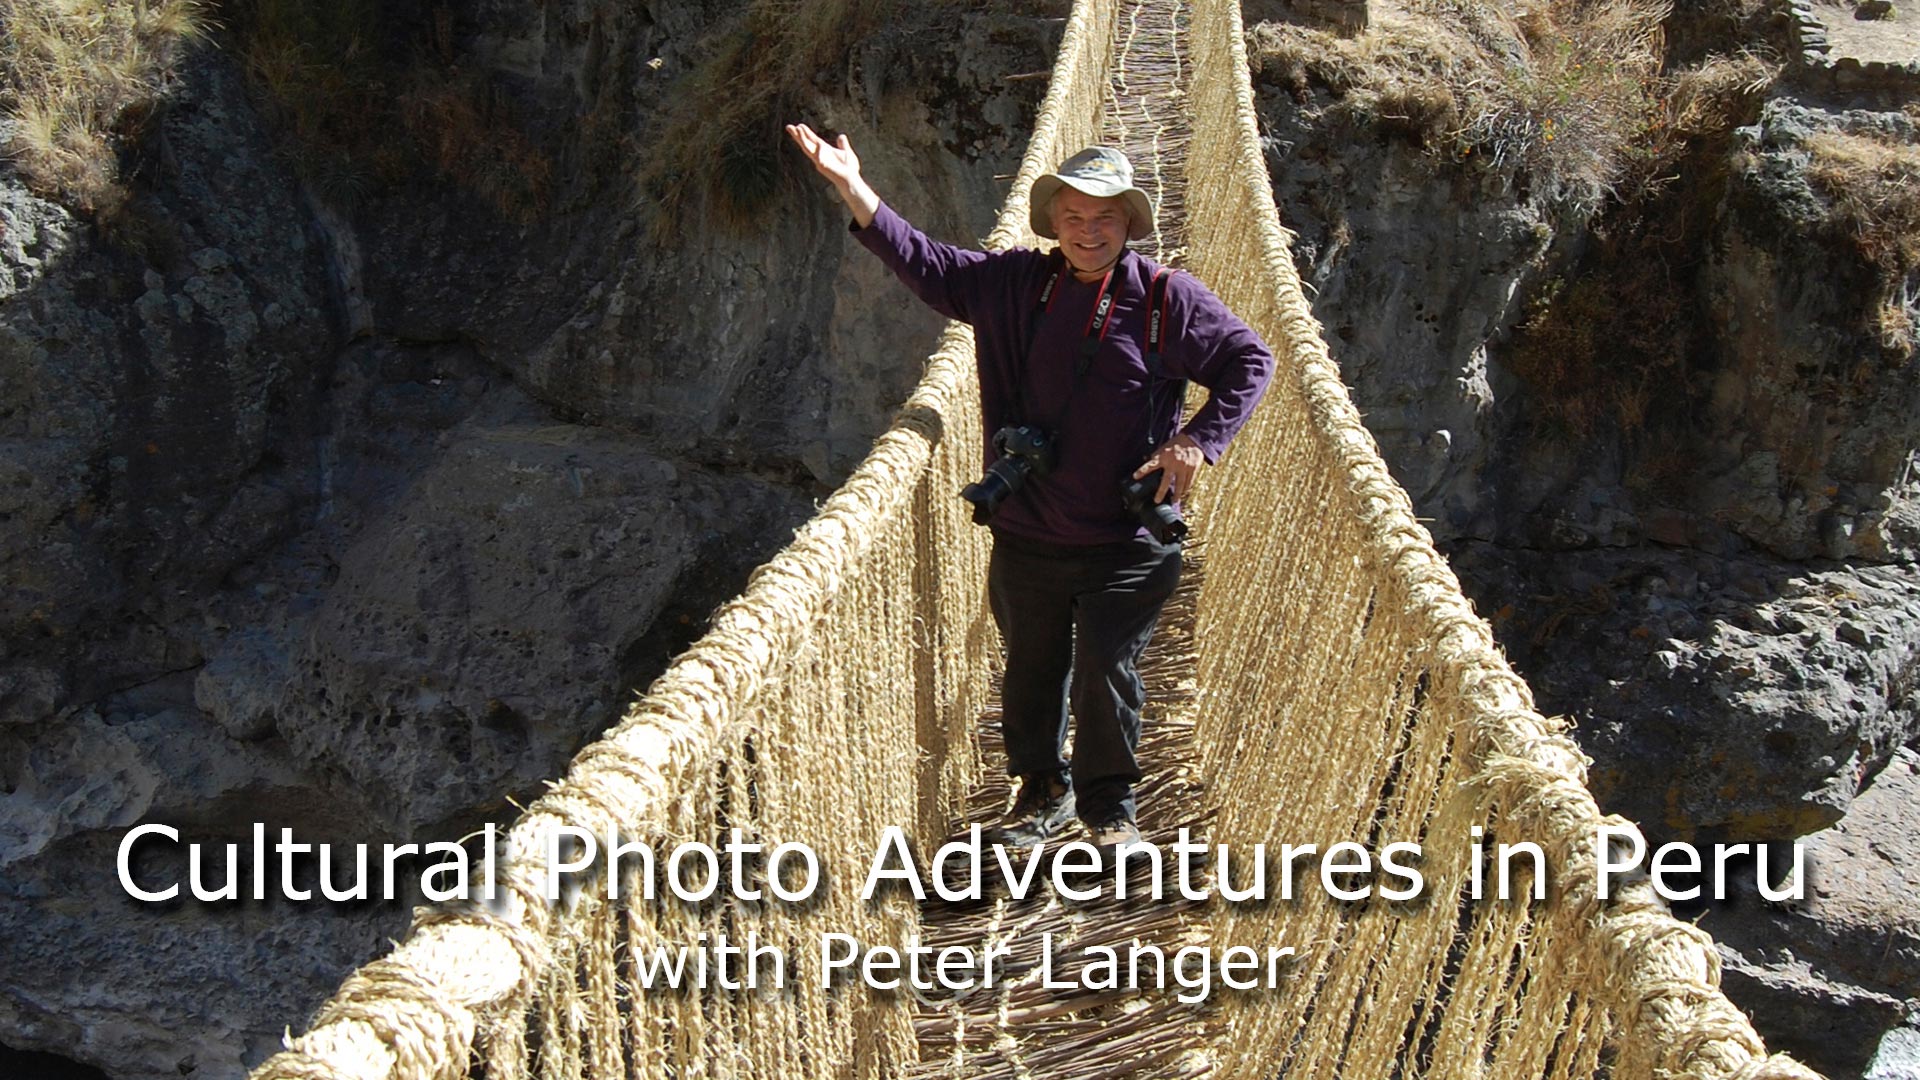 Cultural Photo Adventures in Peru with Peter Langer